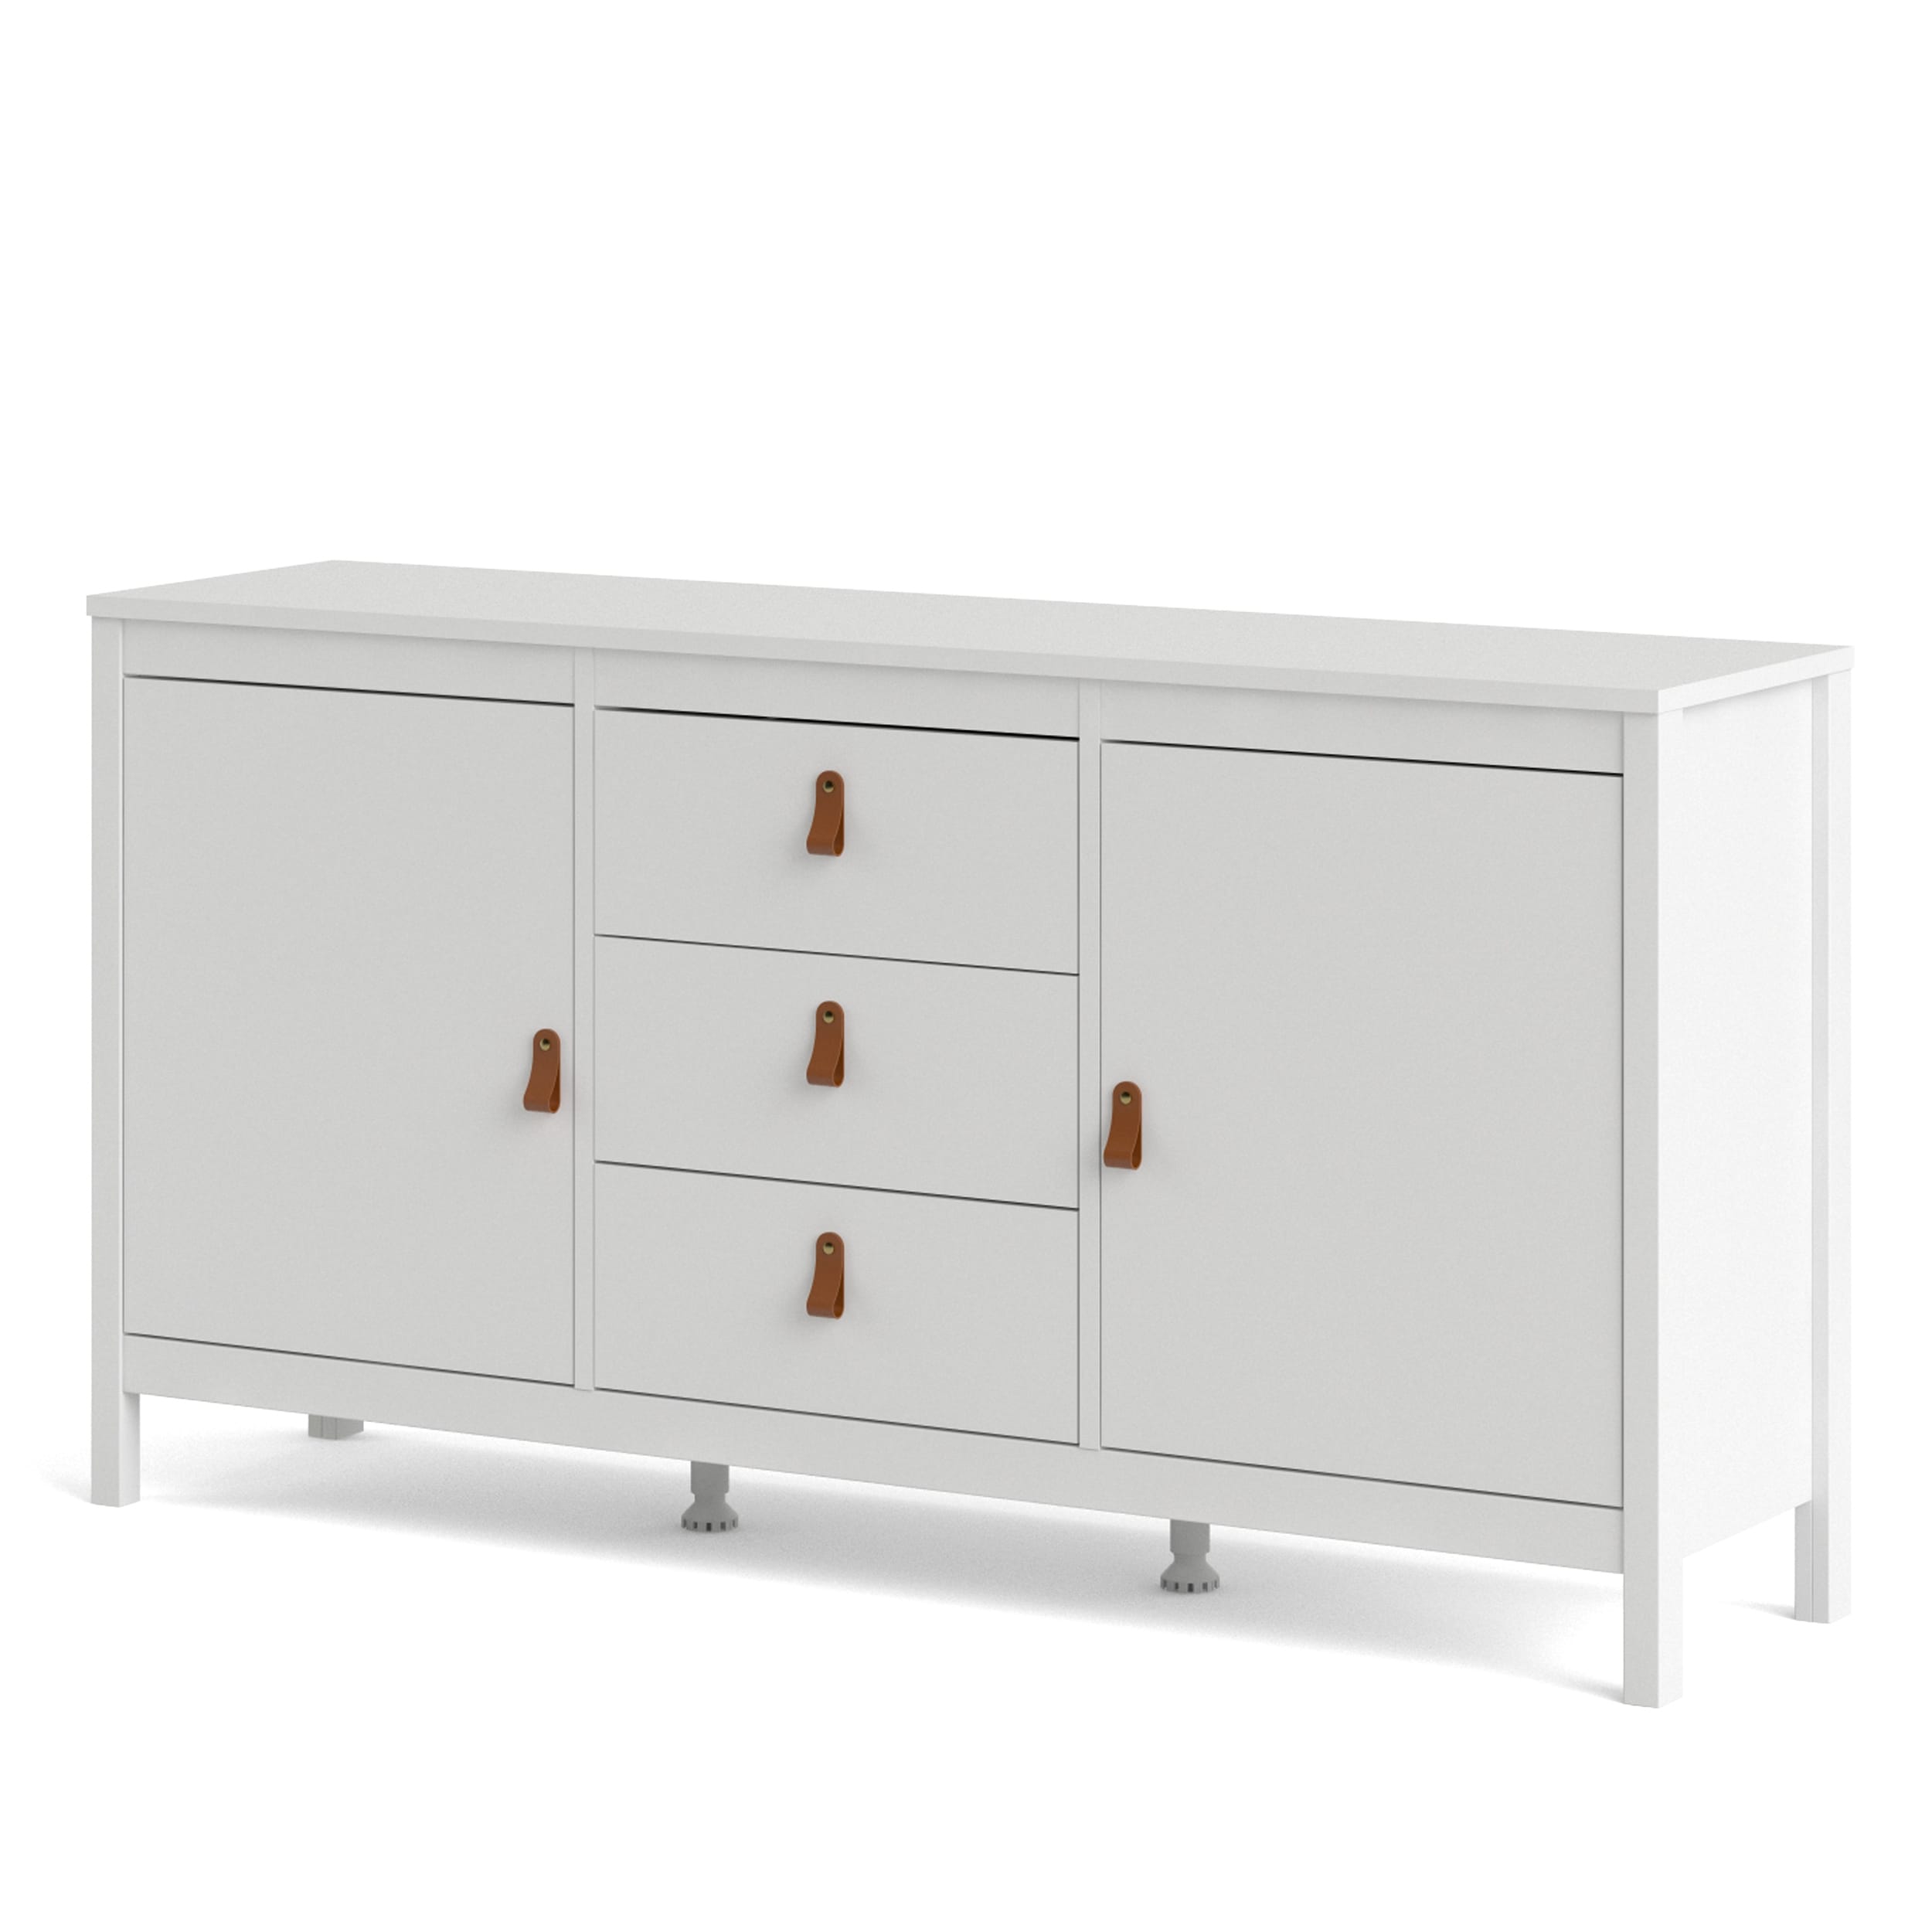 Beyond Porch Sideboard - & Bed Bath On & Sale Den 2-Door Madrid with - 33673465 3-Drawers -